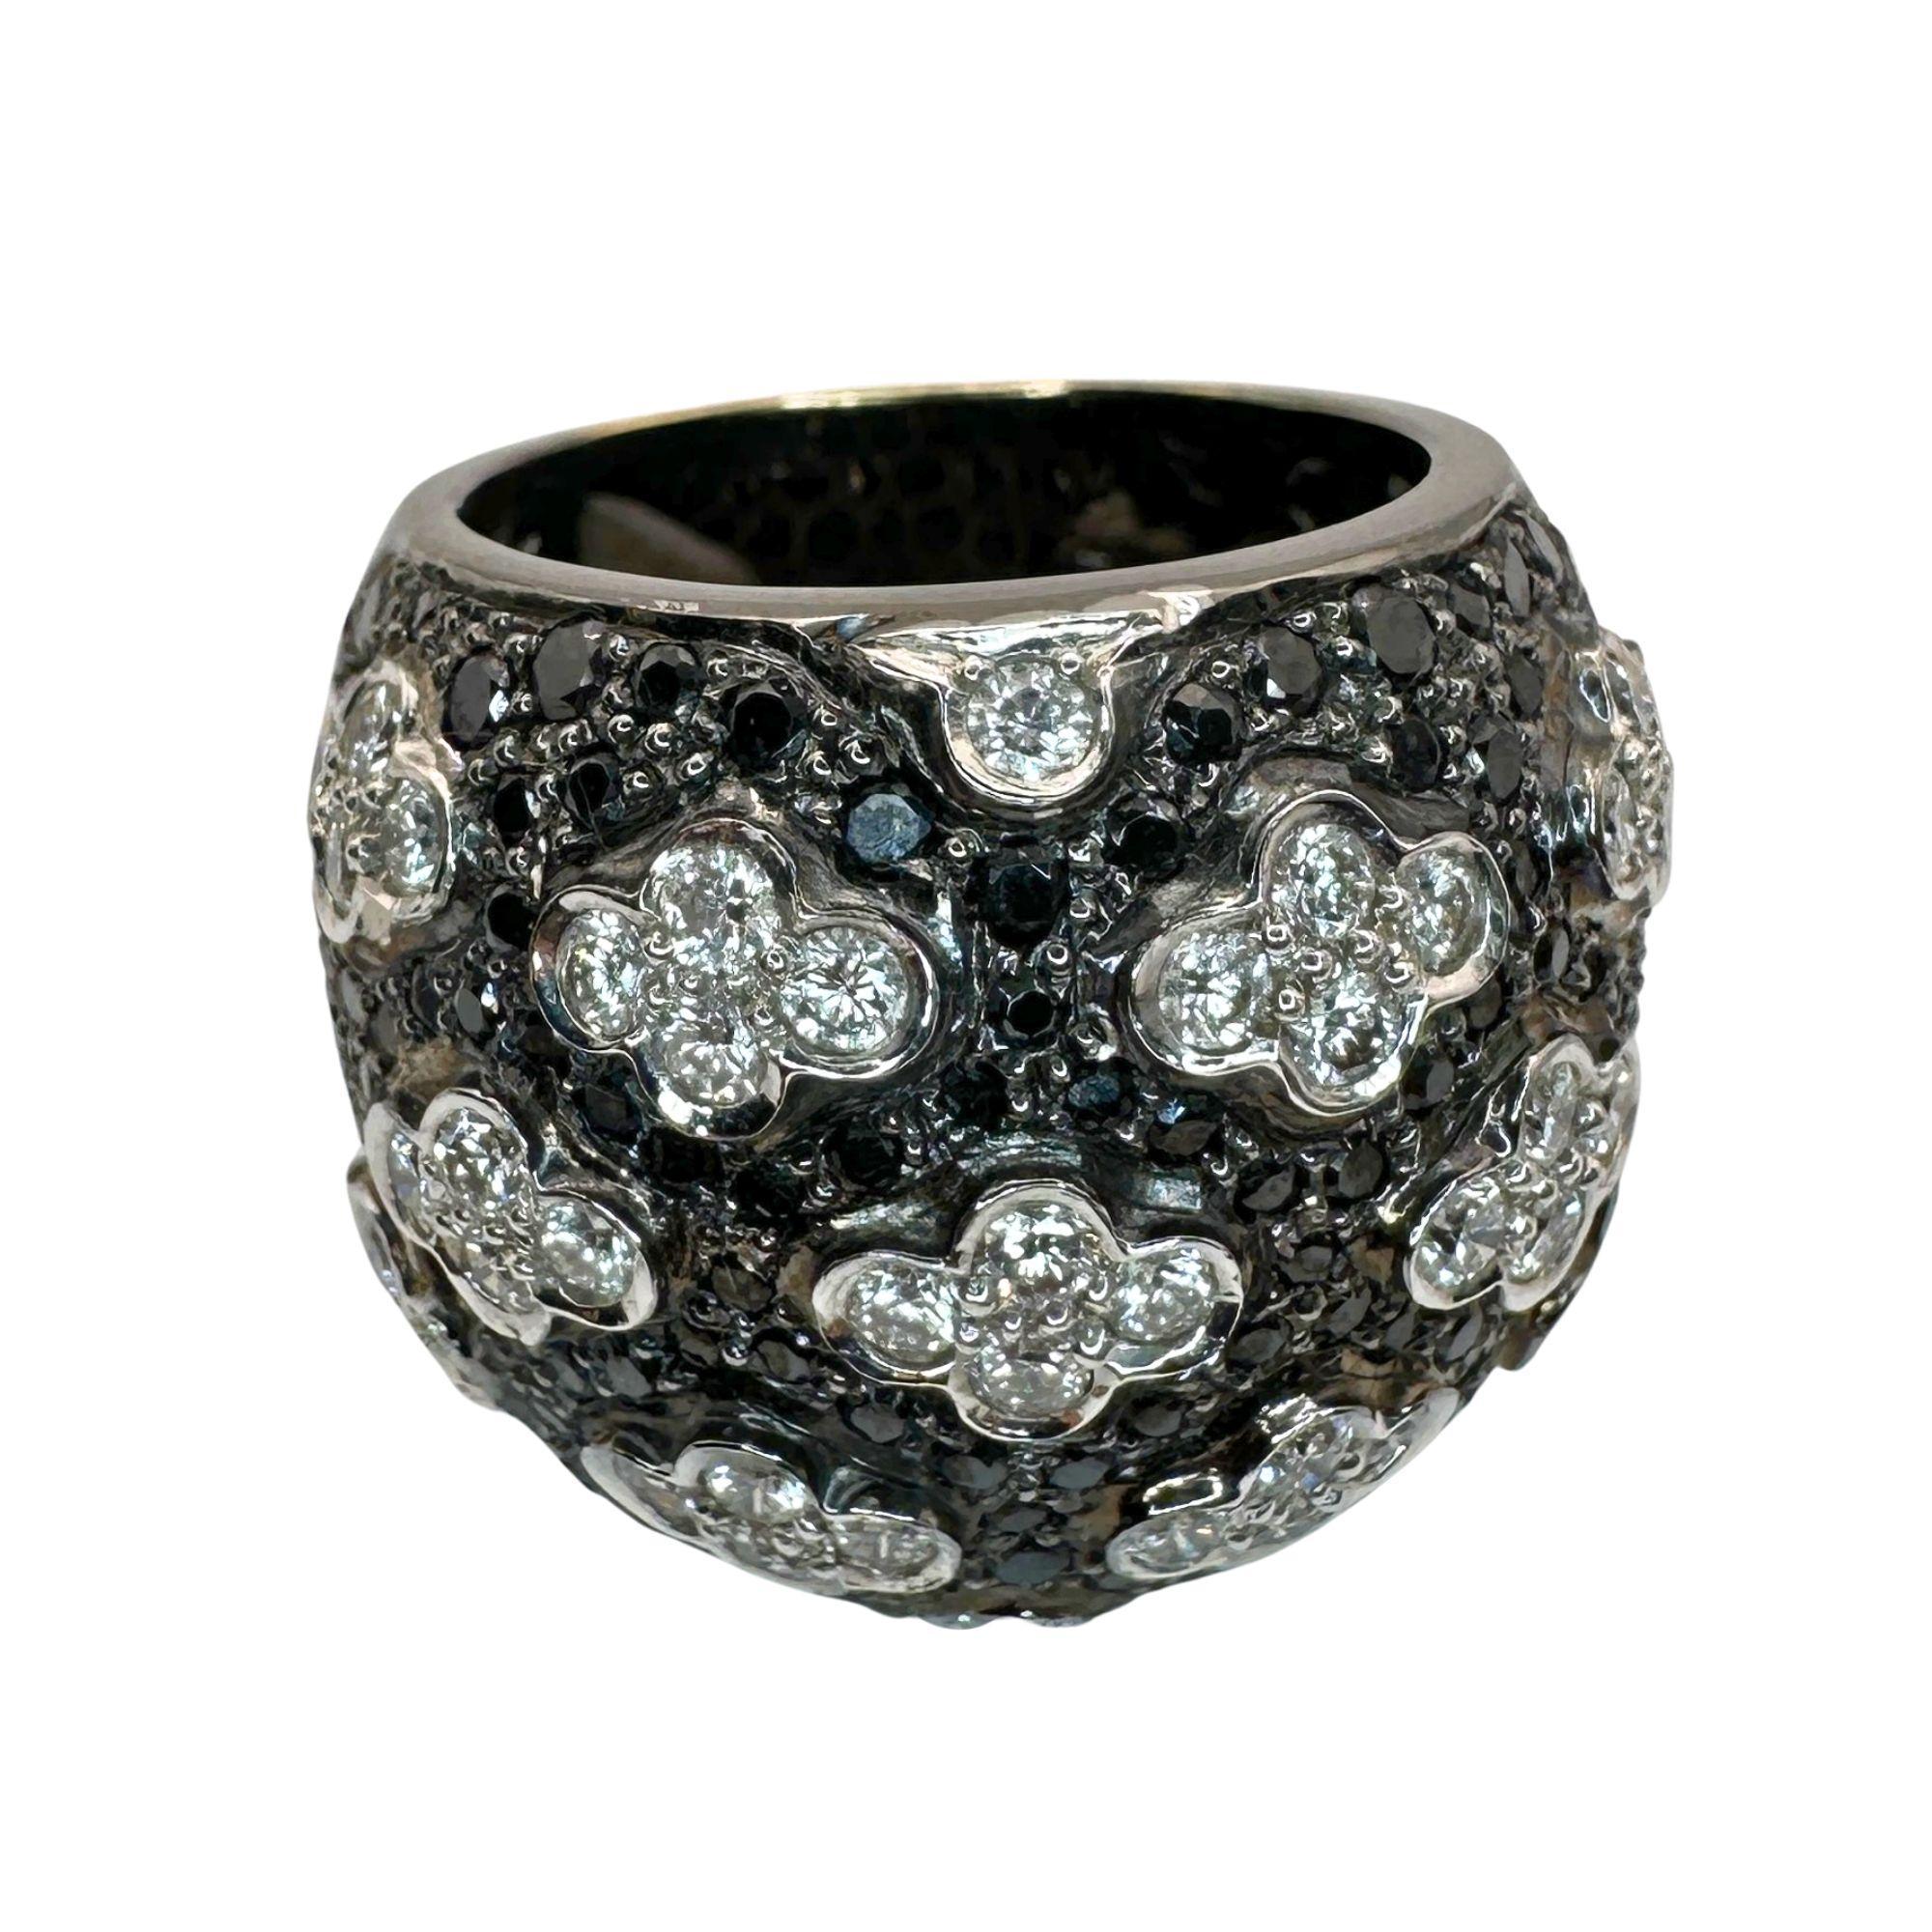 This stunning 18k gold wide band ring features 1.17 carats of sparkling white diamonds and 2.83 carats of striking black diamonds. In good condition with minor surface wear, this ring is sure to make a statement. With a weight of 18 grams and a ring